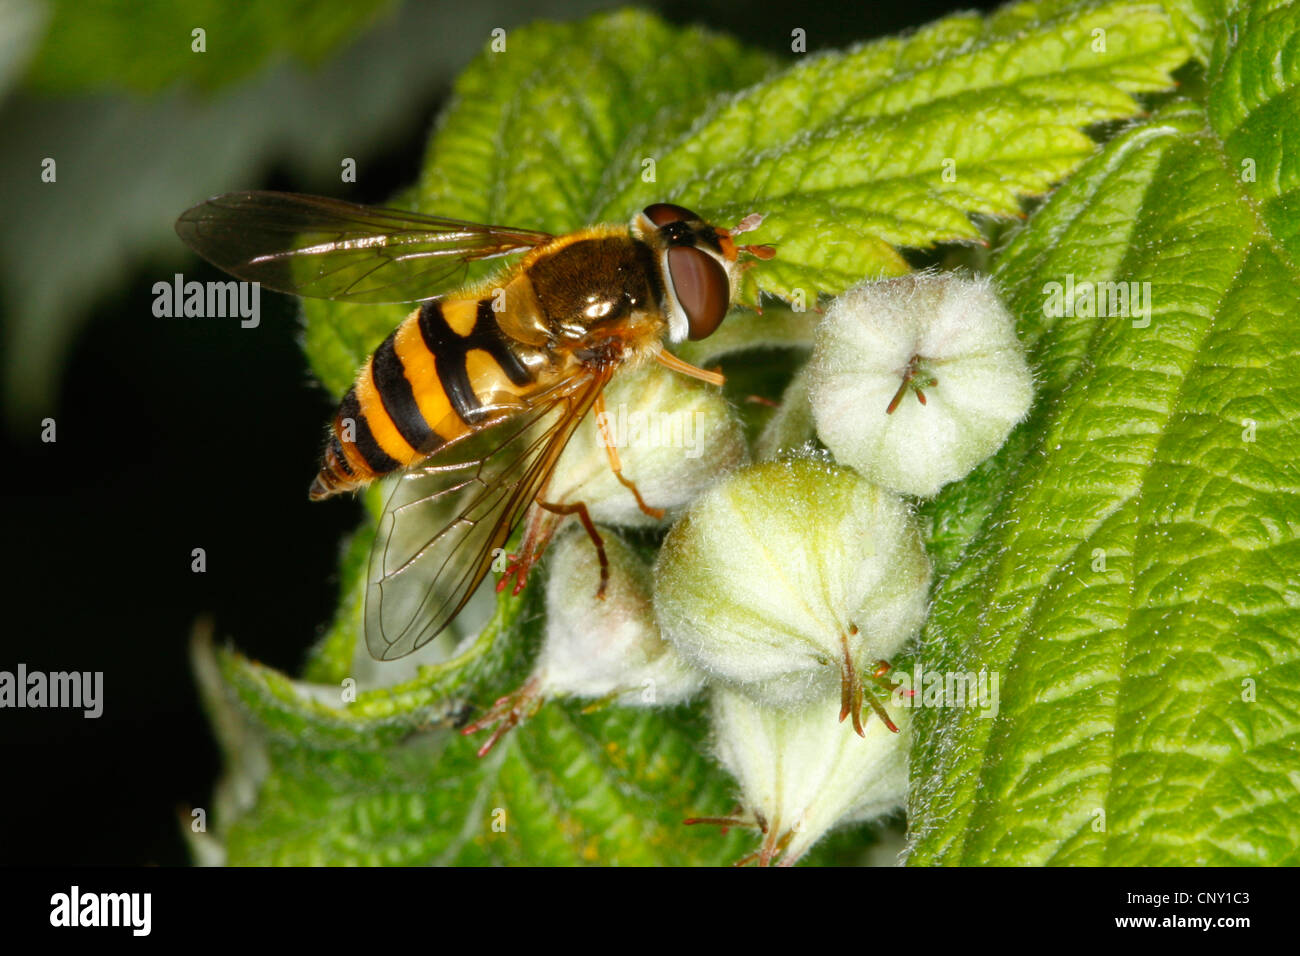 Hoverfly (Epistrophe nitidicollis), sitting on a plant, Germany Stock Photo